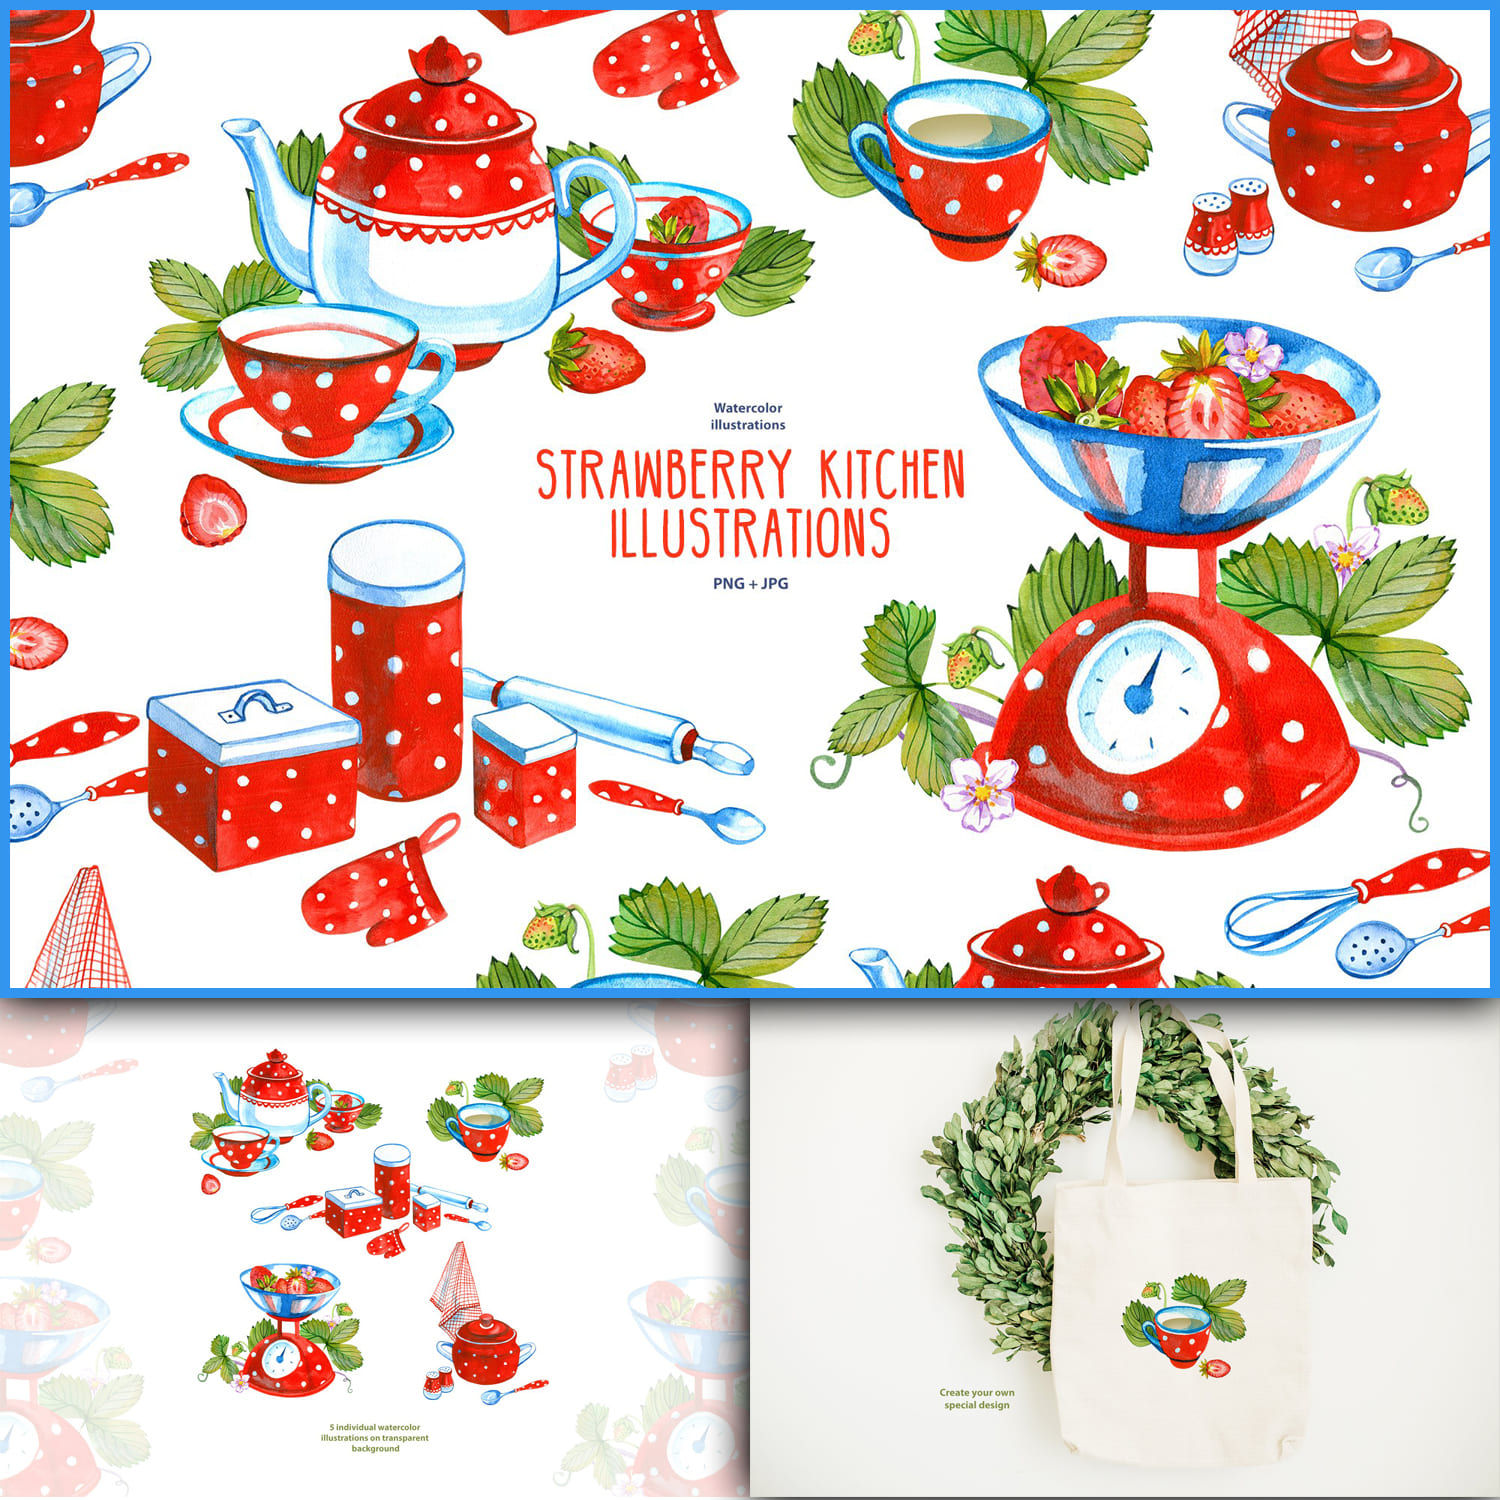 Illustrations of strawberry cuisine in white polka dots.